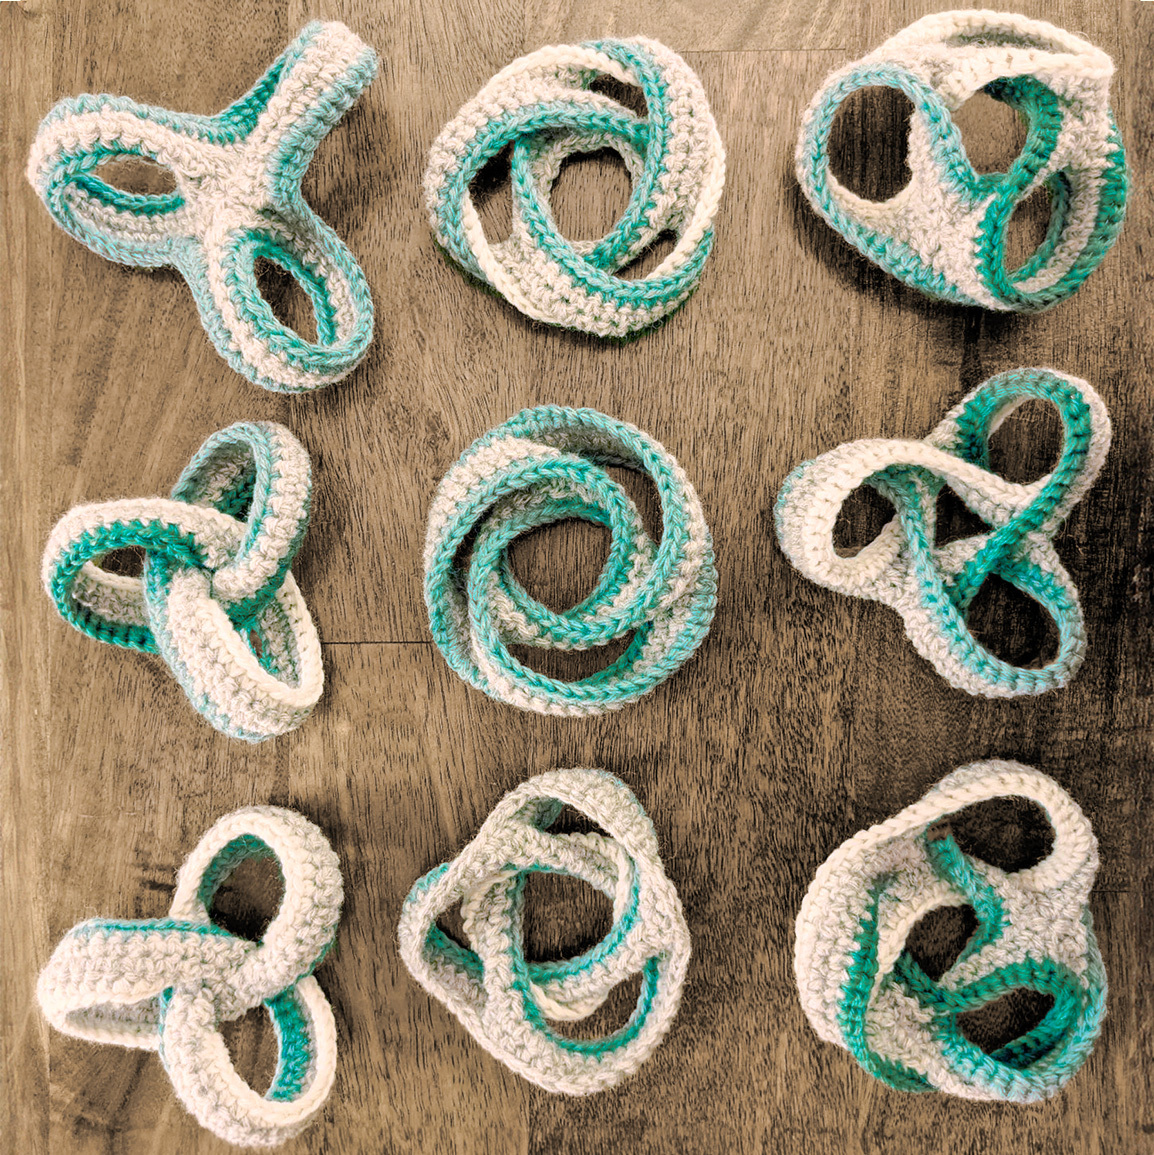 14 of The Best Scissors for Crochet (Functional and Beautiful